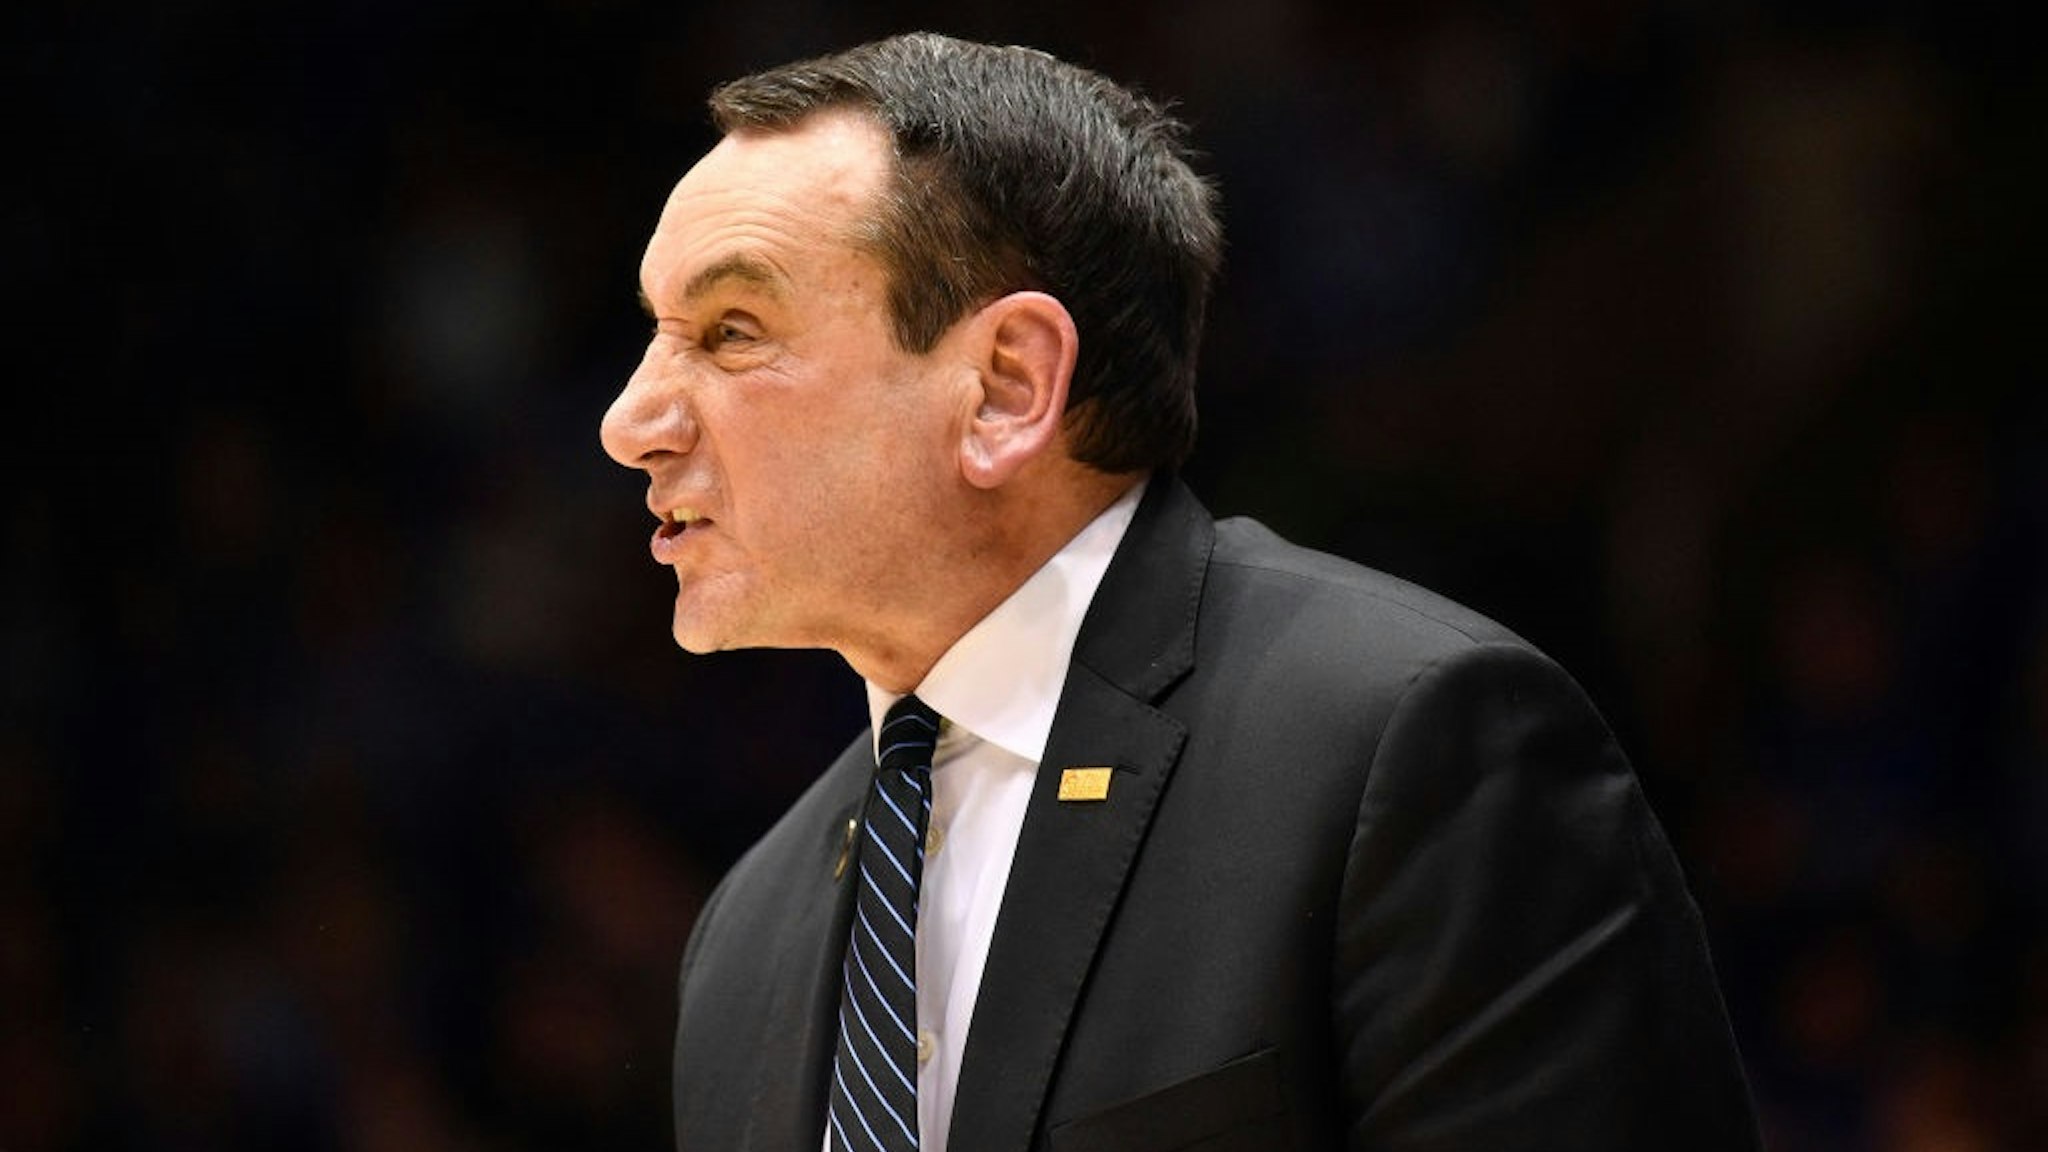 DURHAM, NORTH CAROLINA - MARCH 07: Head coach Mike Krzyzewski of the Duke Blue Devils reacts during the second half of their game against the North Carolina Tar Heels at Cameron Indoor Stadium on March 07, 2020.